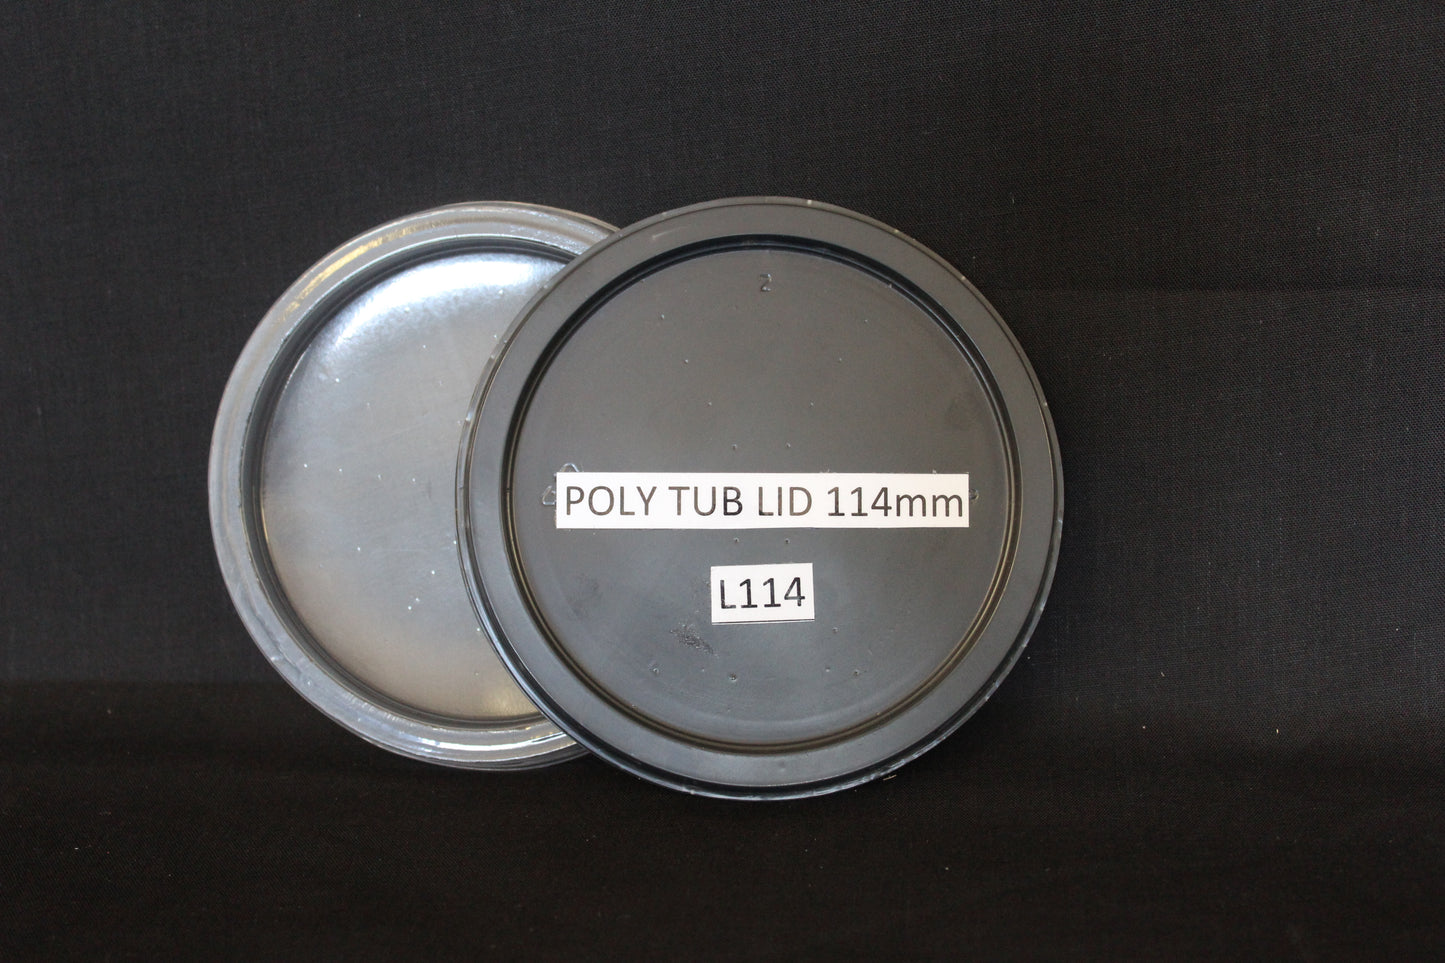 POLY TUB LIDS 114mm (1000) - Unome